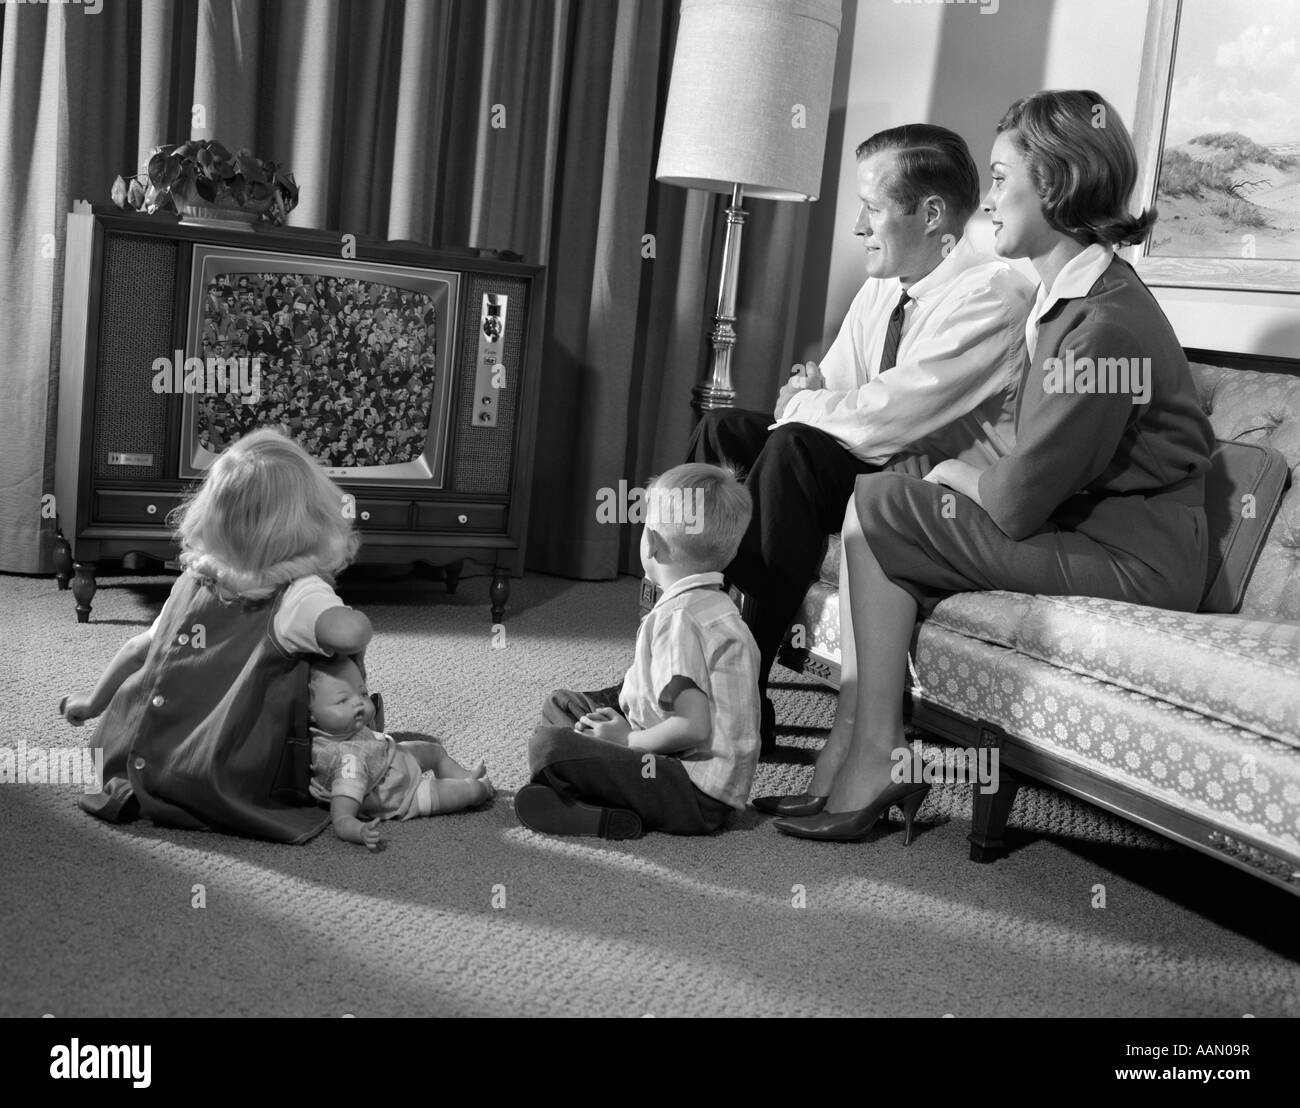 1960s FAMILY MOM DAD 2 KIDS WATCHING TELEVISION Stock Photo